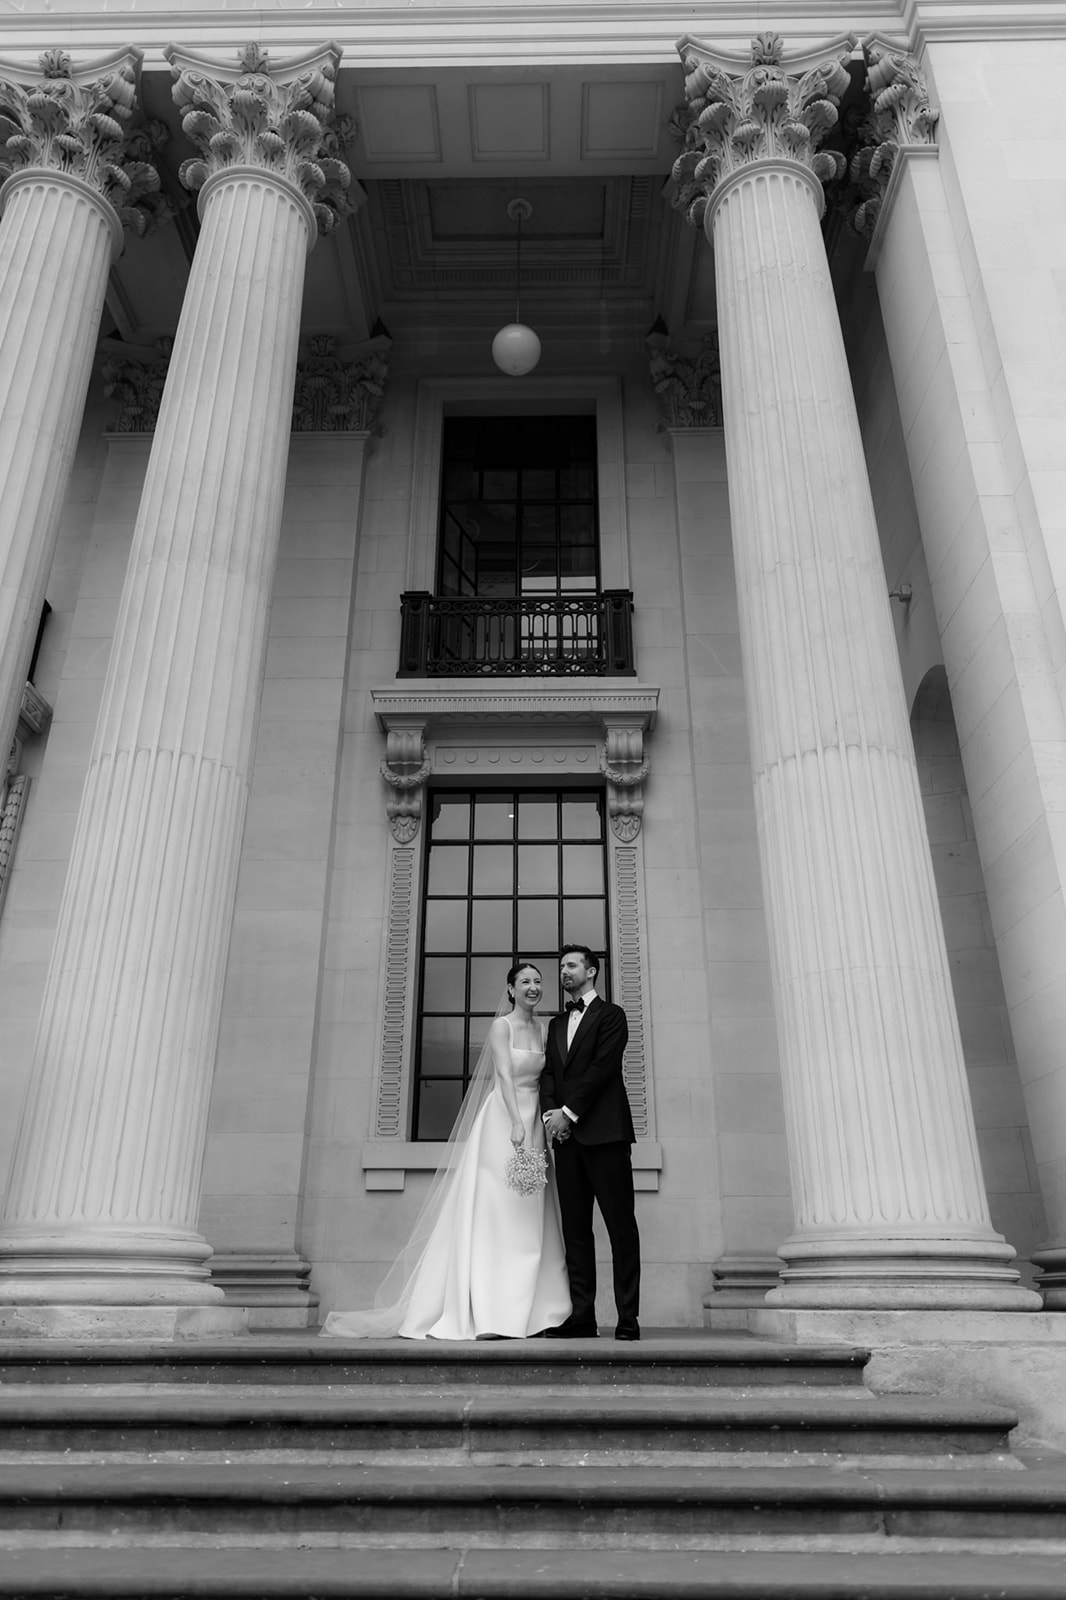 Couple getting married at Old Marylebone Town Hall in London.